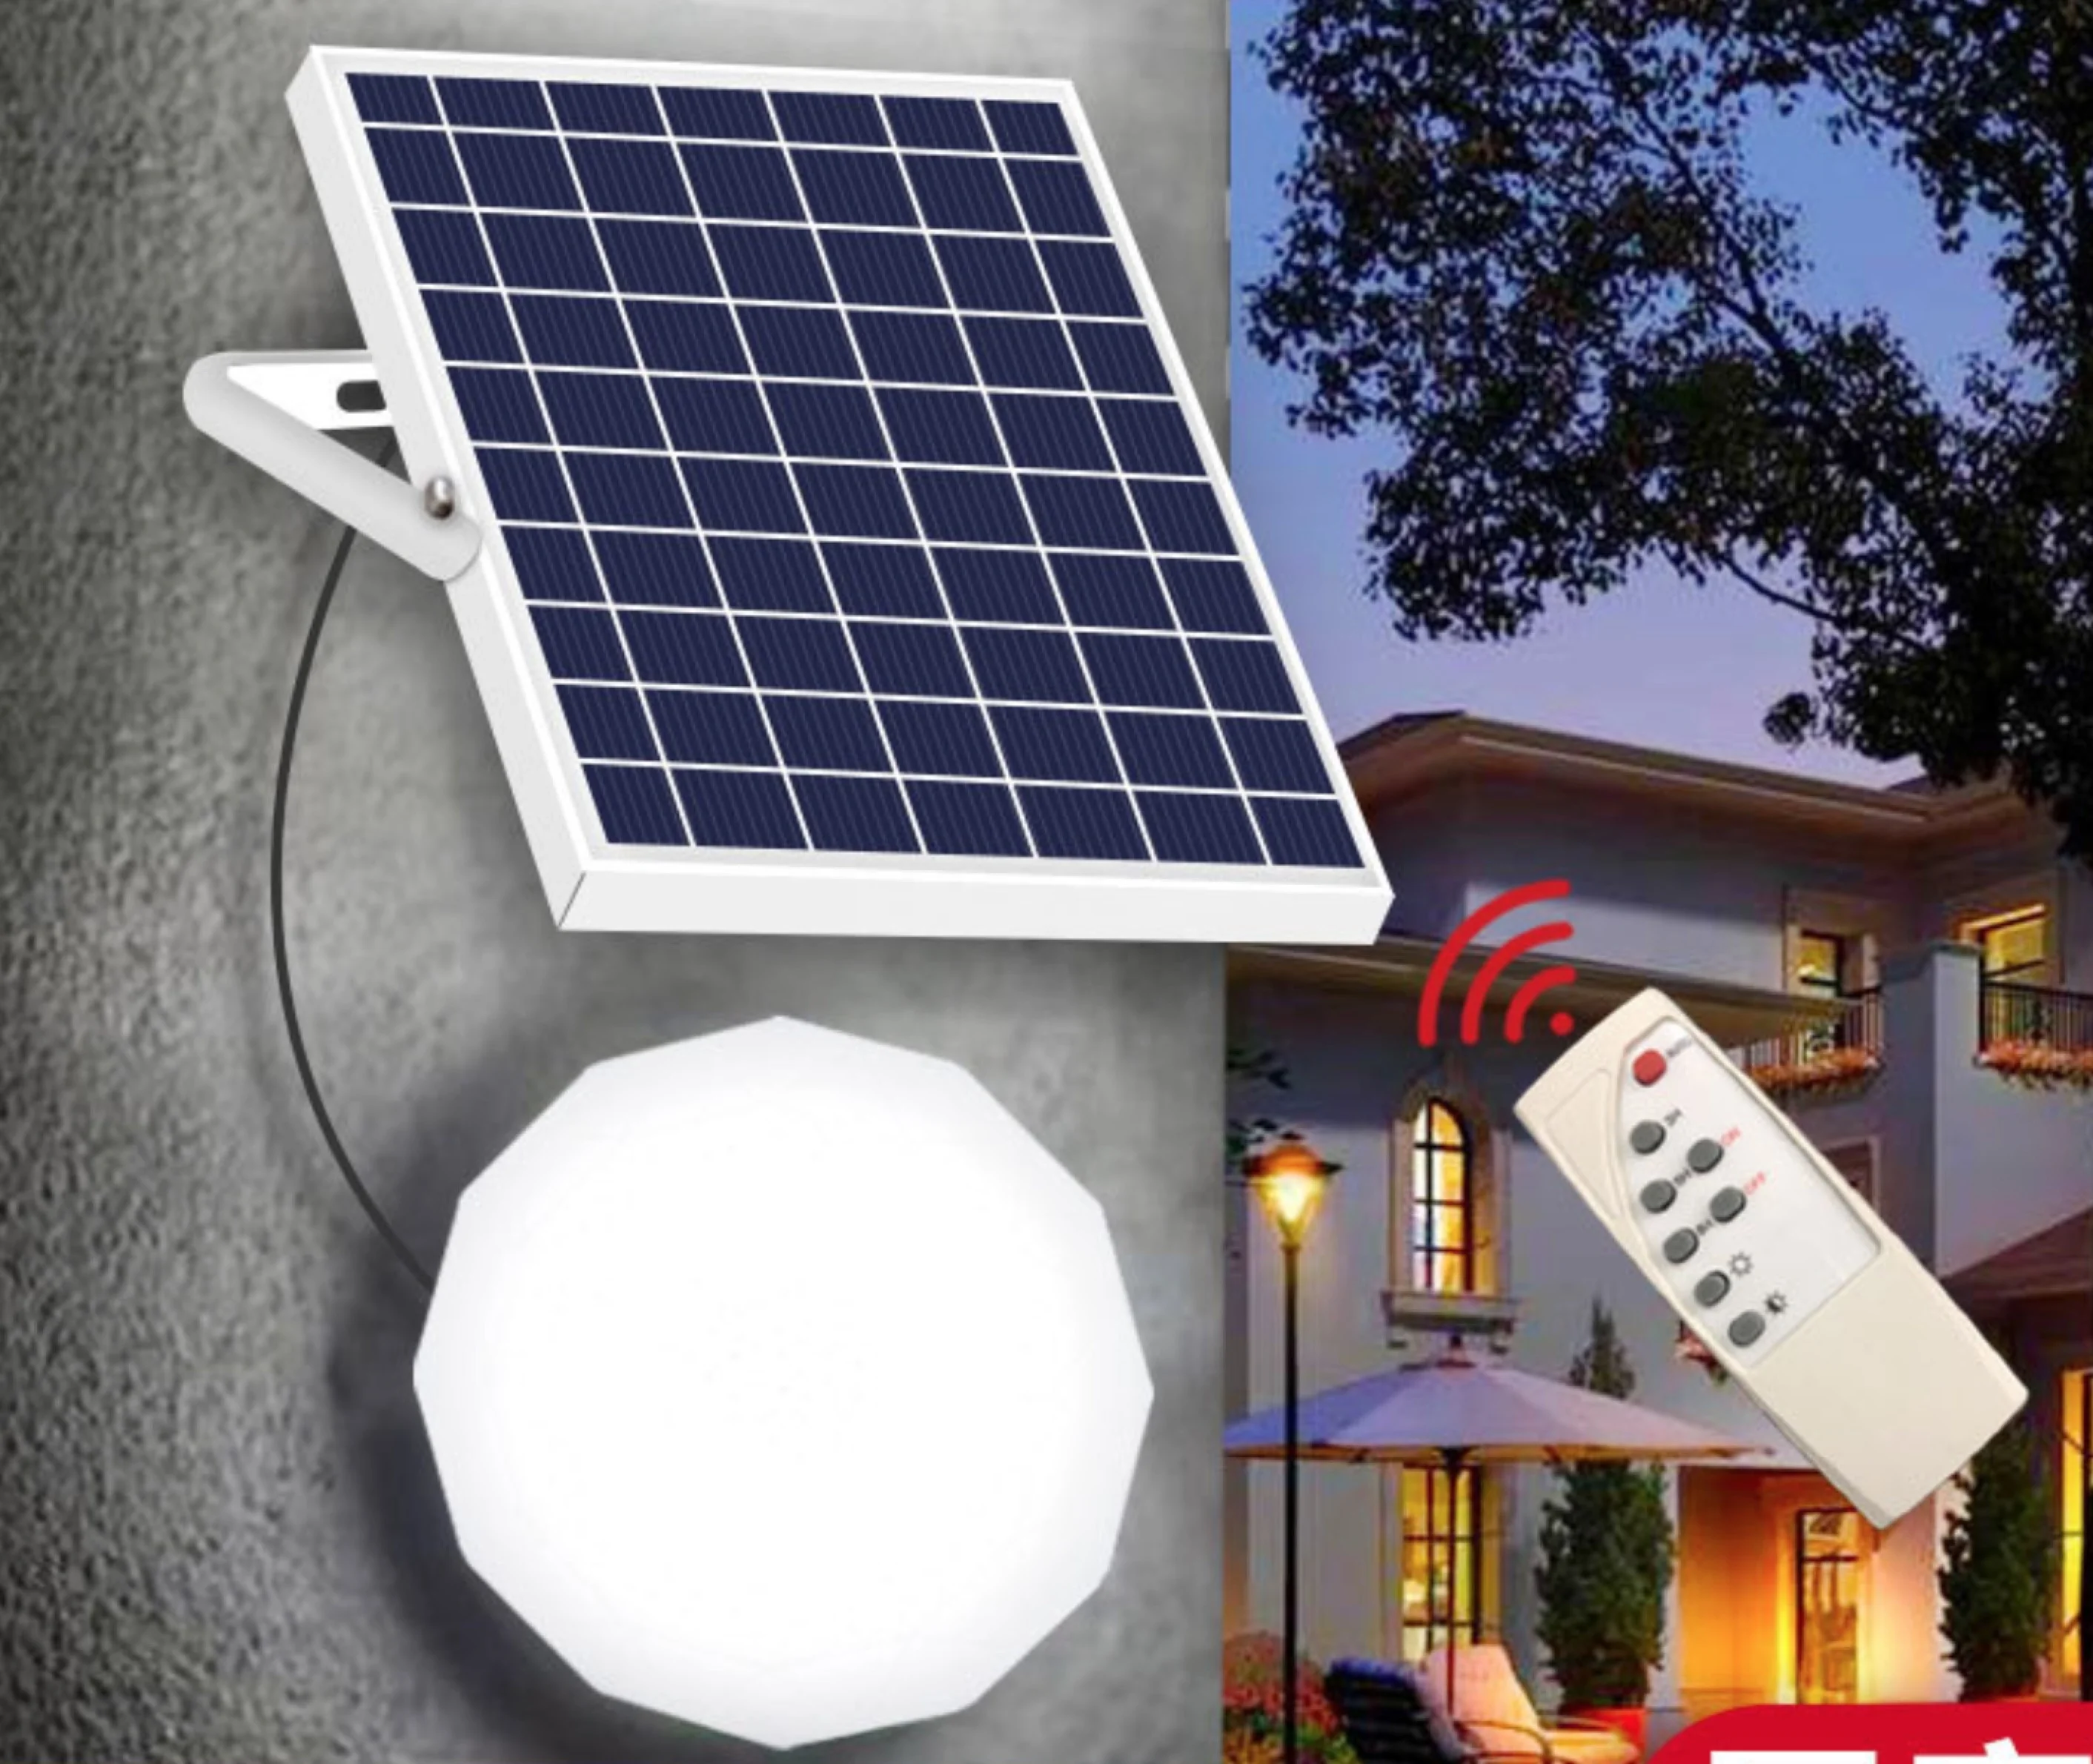 Led Solar Ceiling Light 50w Powered Sun With 2 Years Warranty Time Don